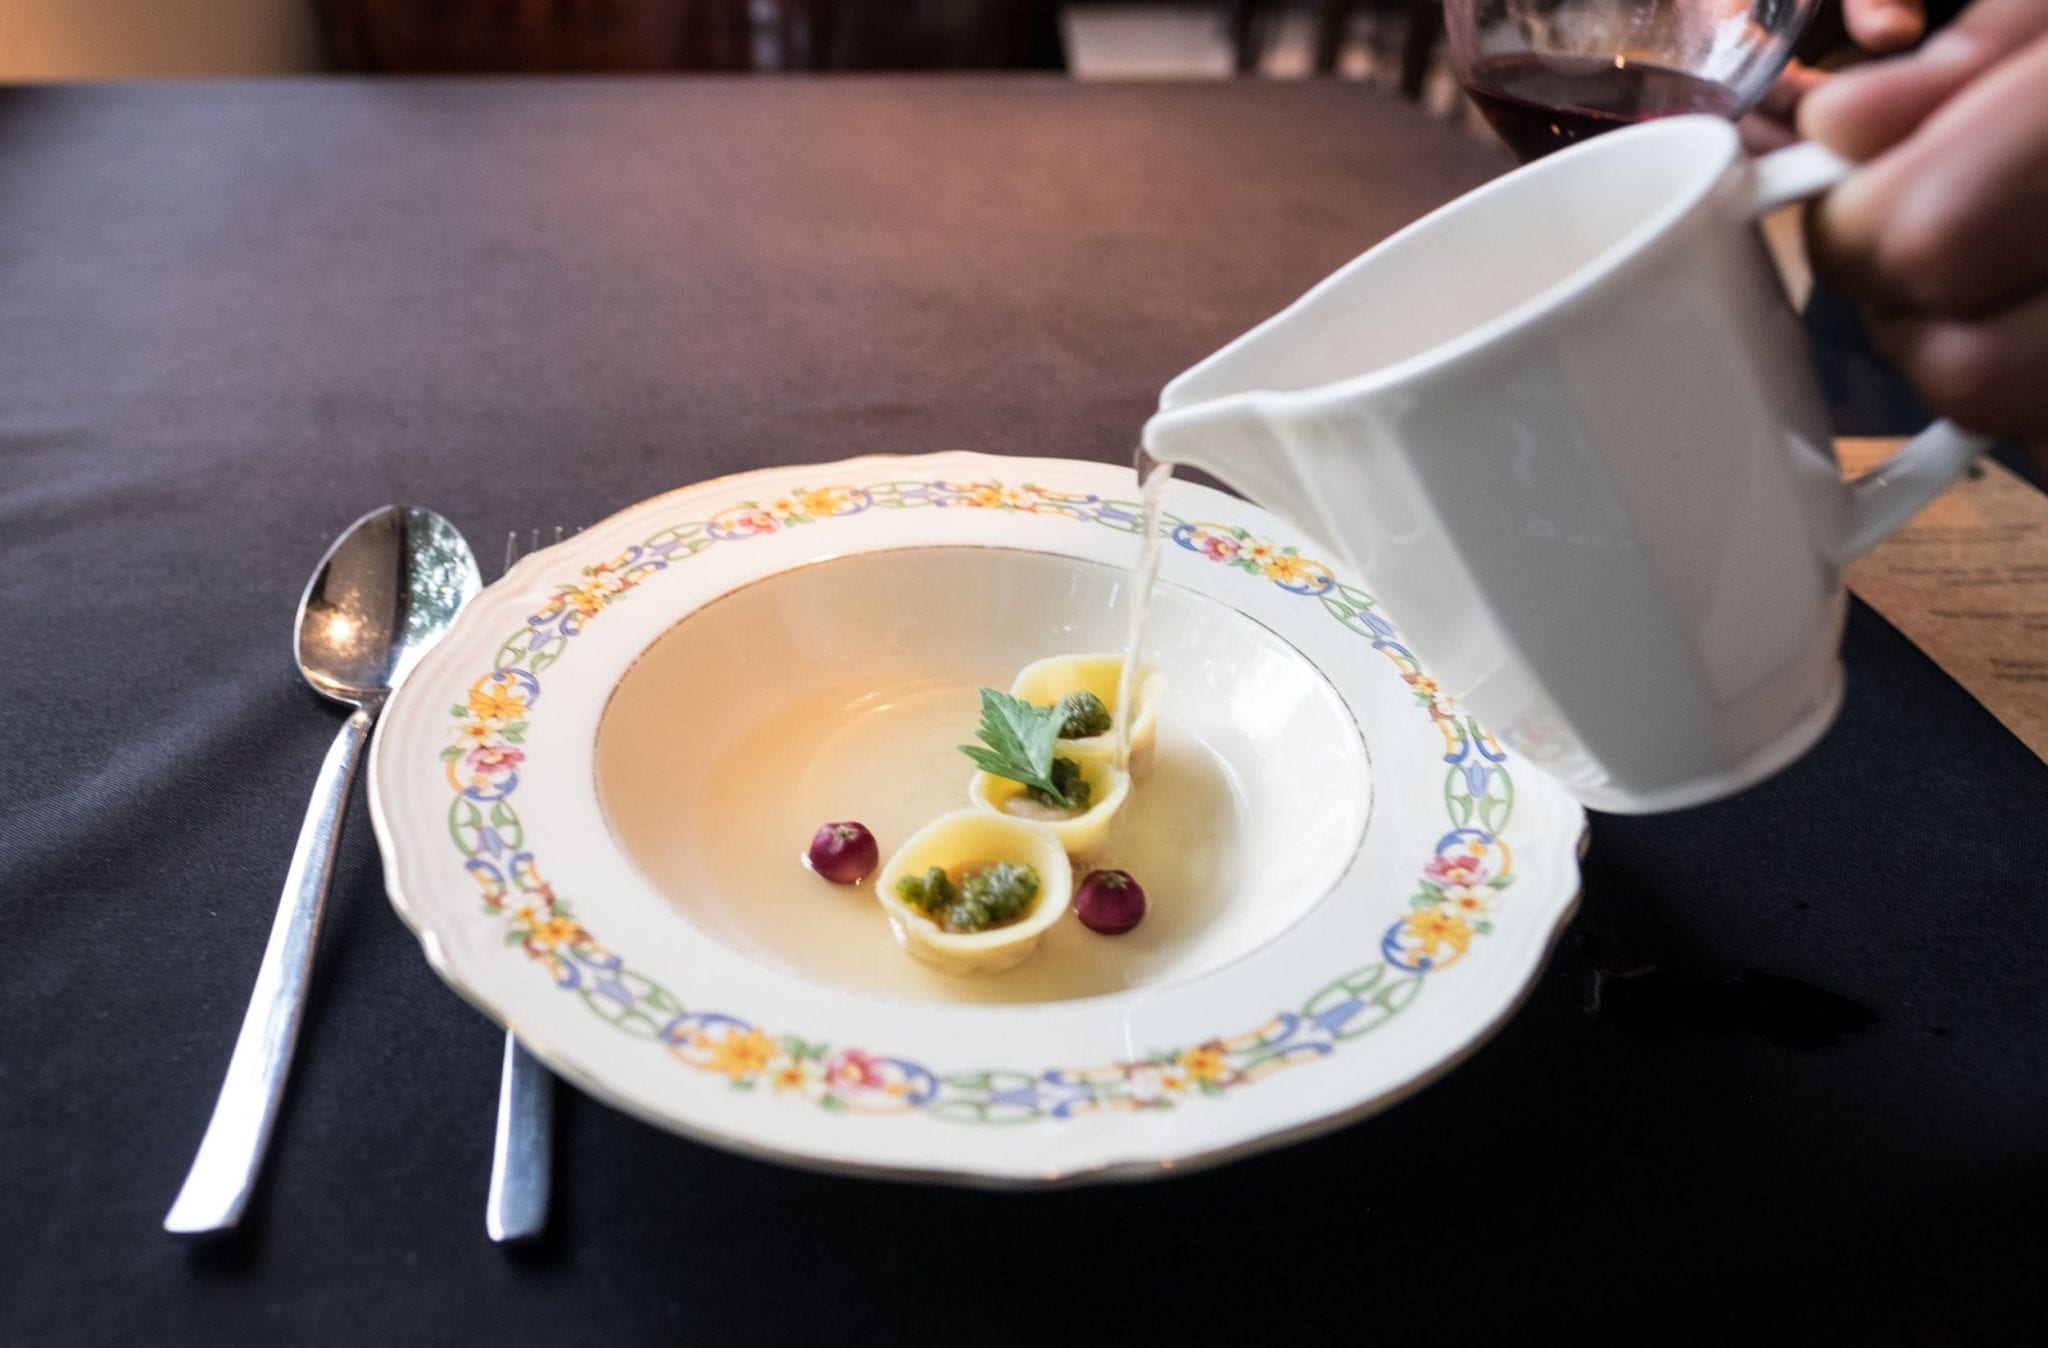 A plate with three pieces of round pasta in it, and a hand pouring in soup from a cup.